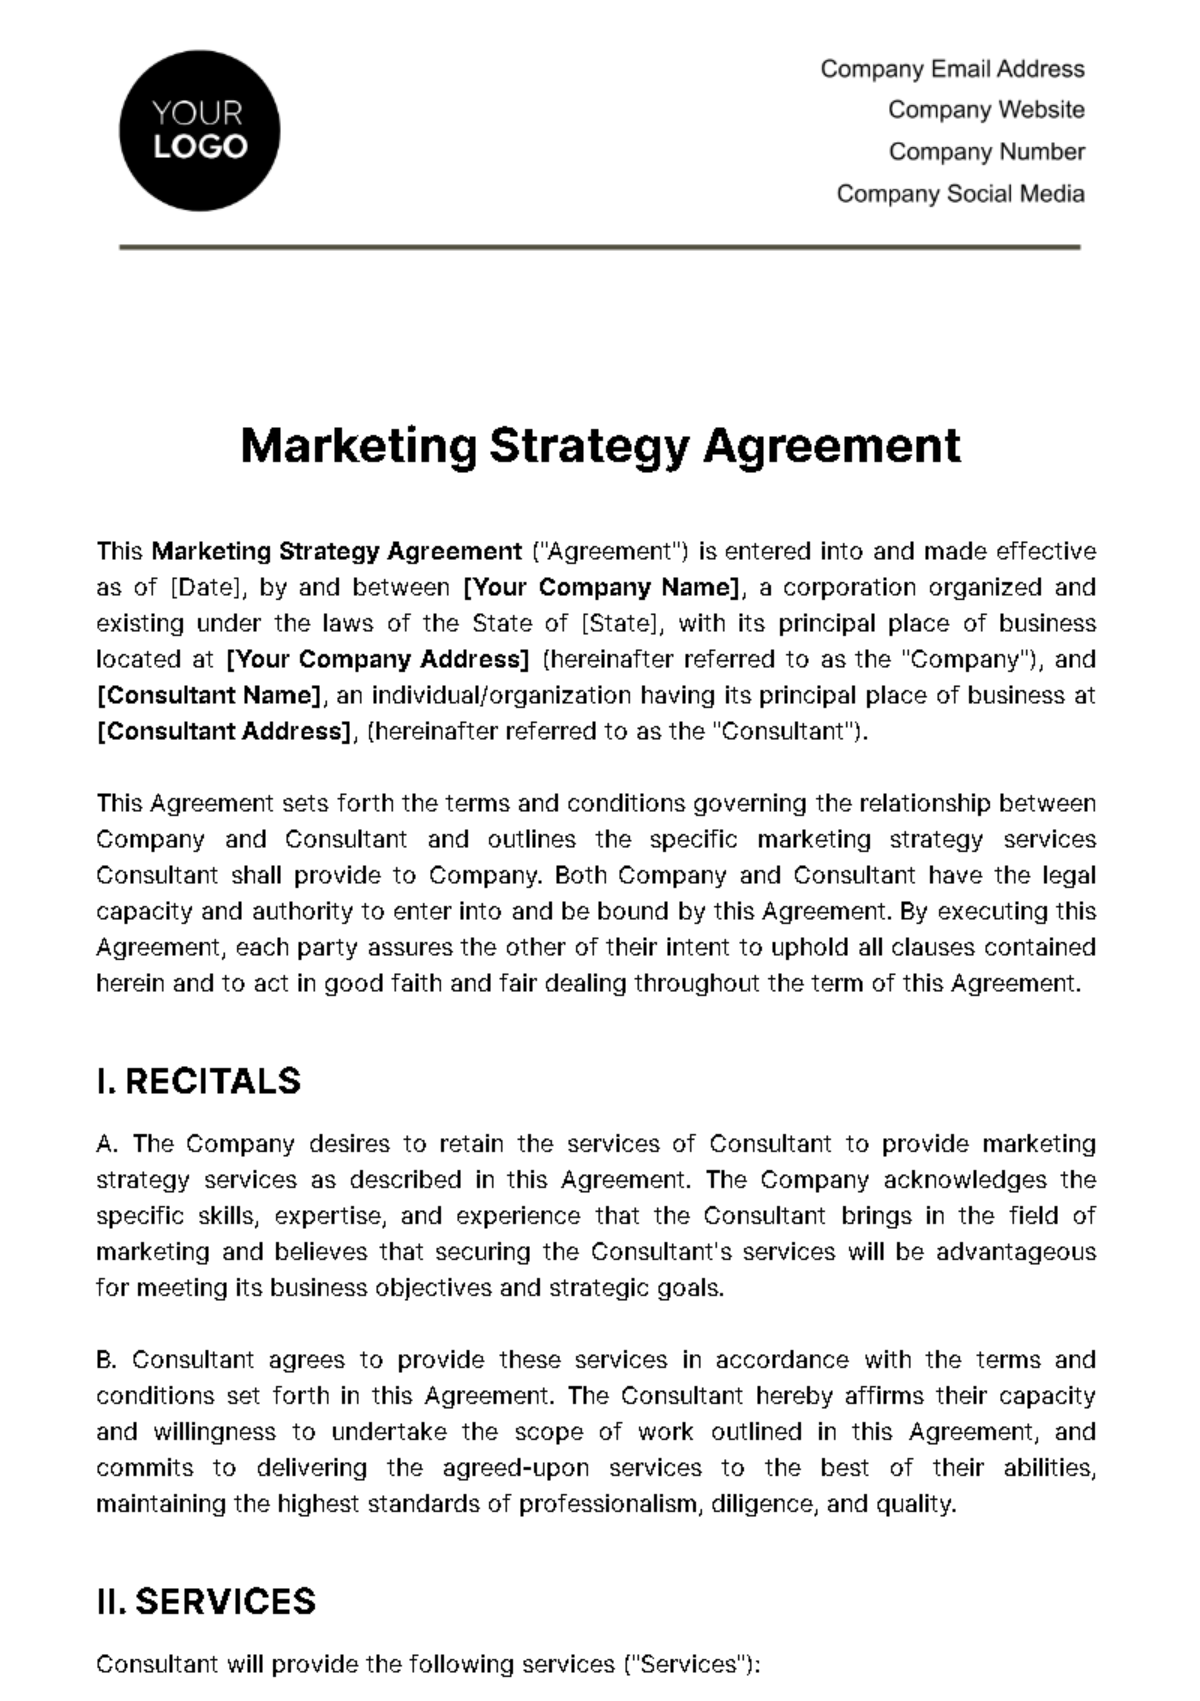 Free Marketing Strategy Agreement Template